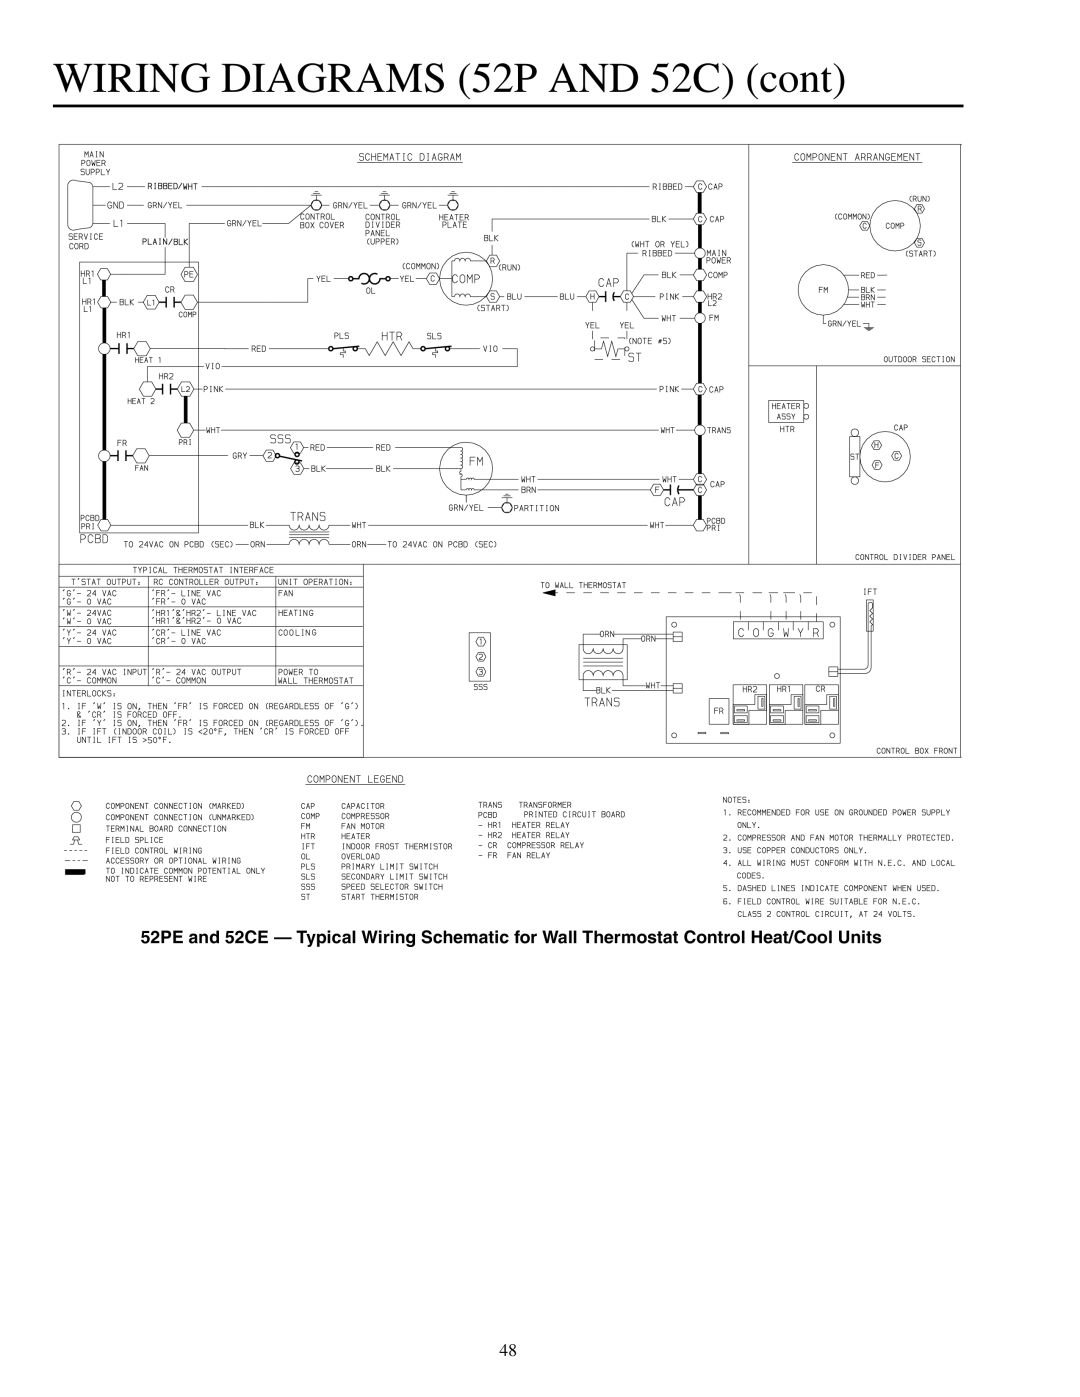 Carrier 592-085 warranty WIRING DIAGRAMS 52P AND 52C cont 